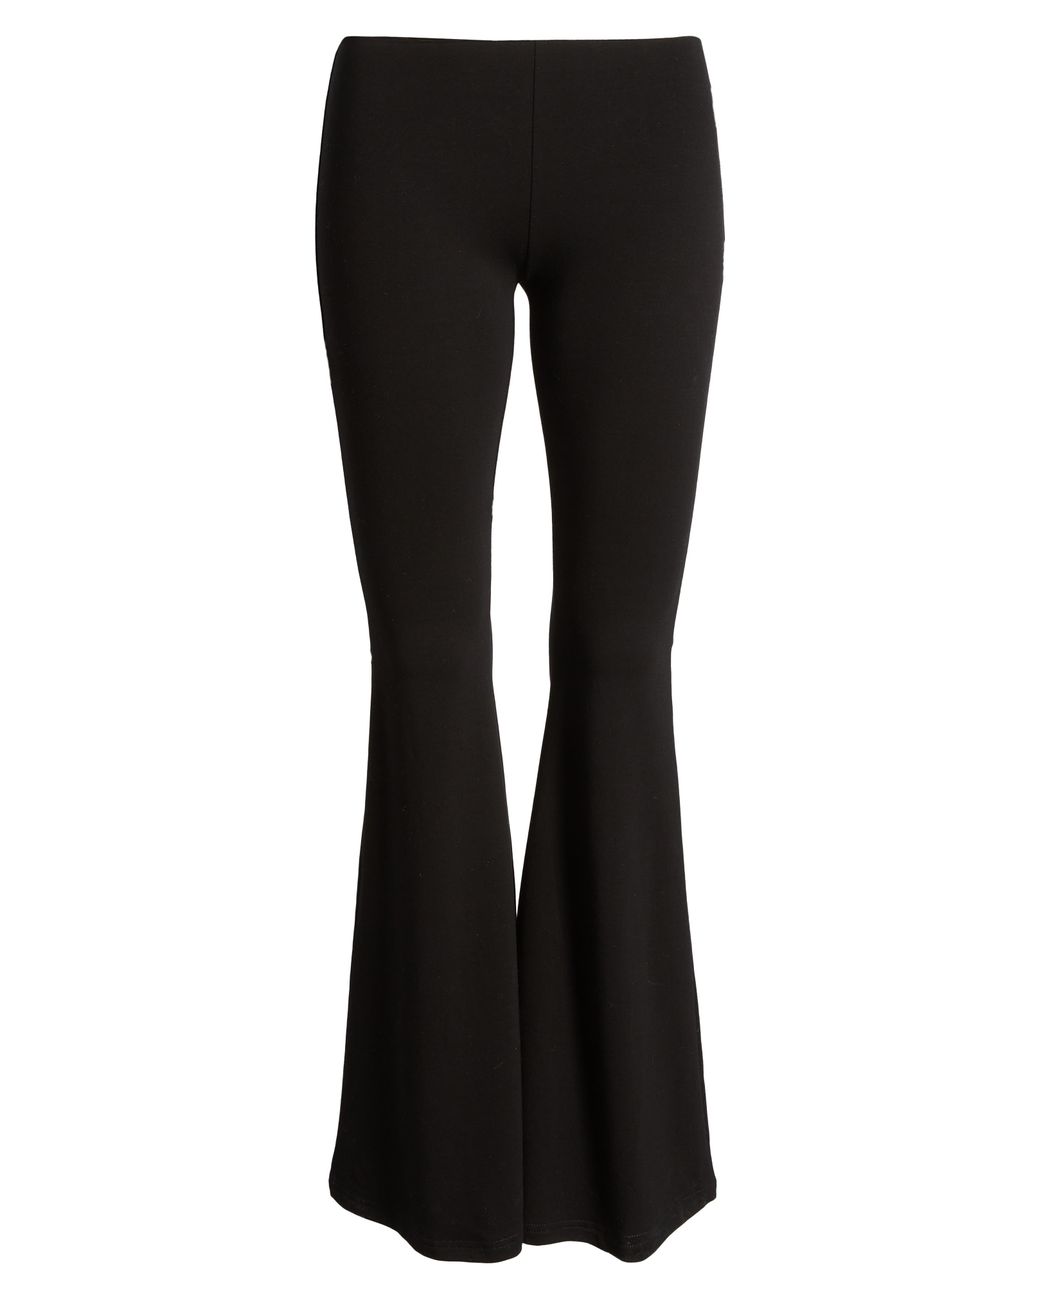 Contrast Fold Over Flared Leggings - BLACK AND WHITE / L